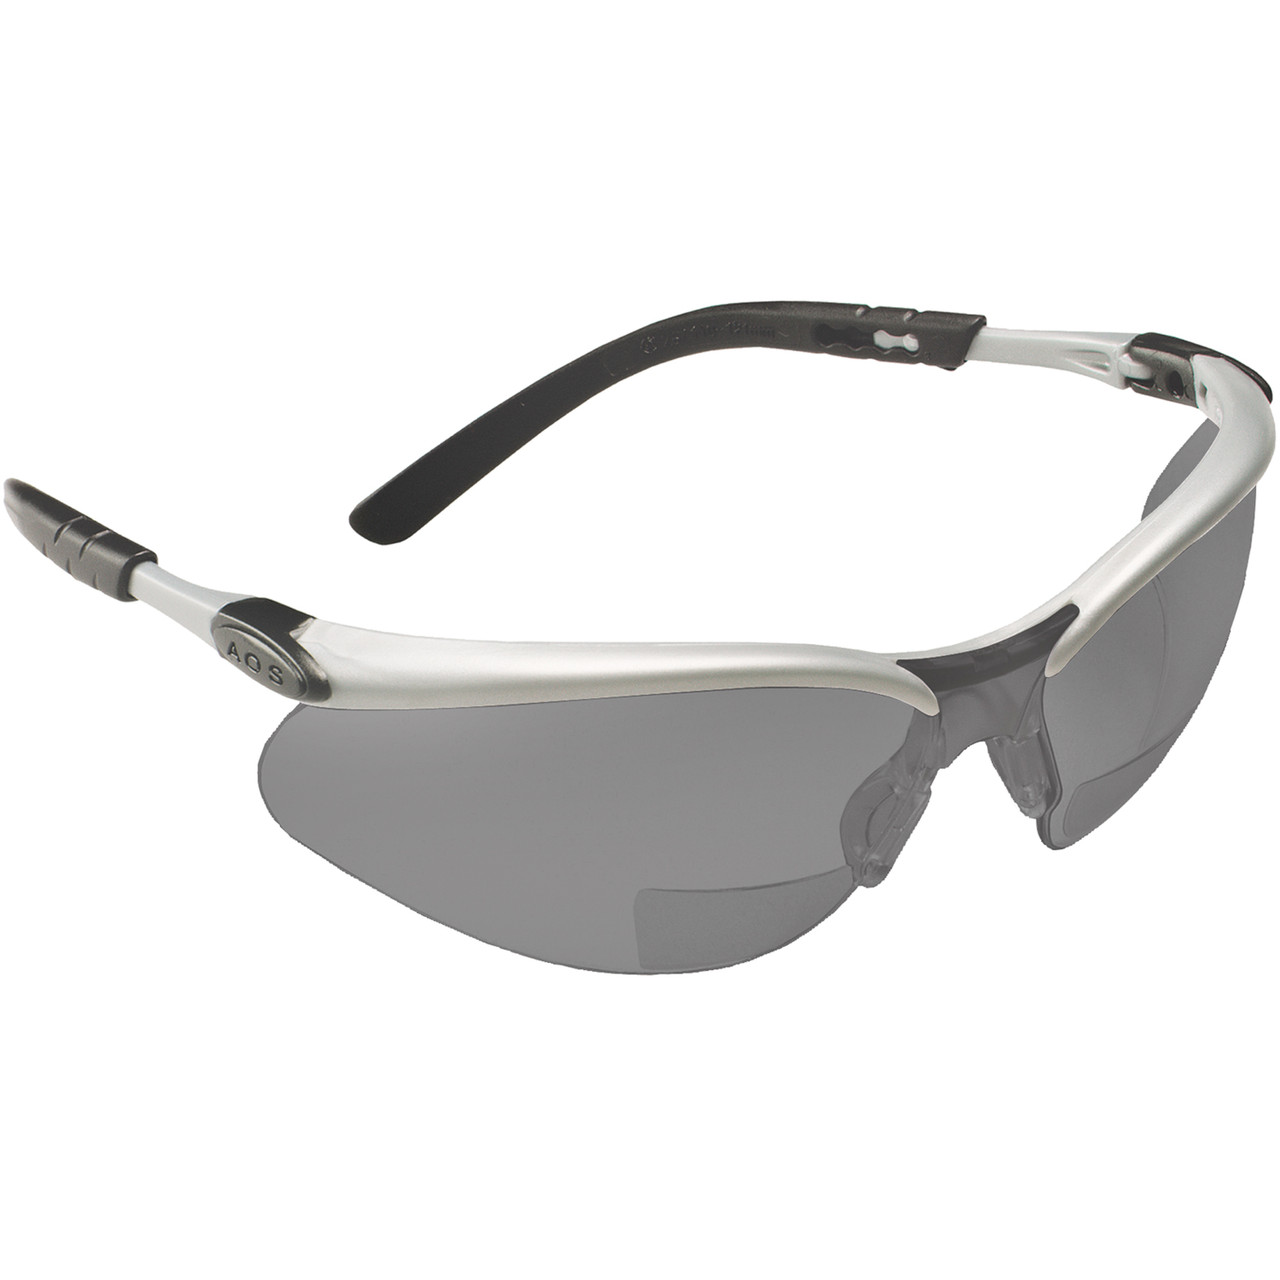 BX® Readers Safety Glasses w/Grey Smoke Lens +2.5 Diopter  11379-00000-20